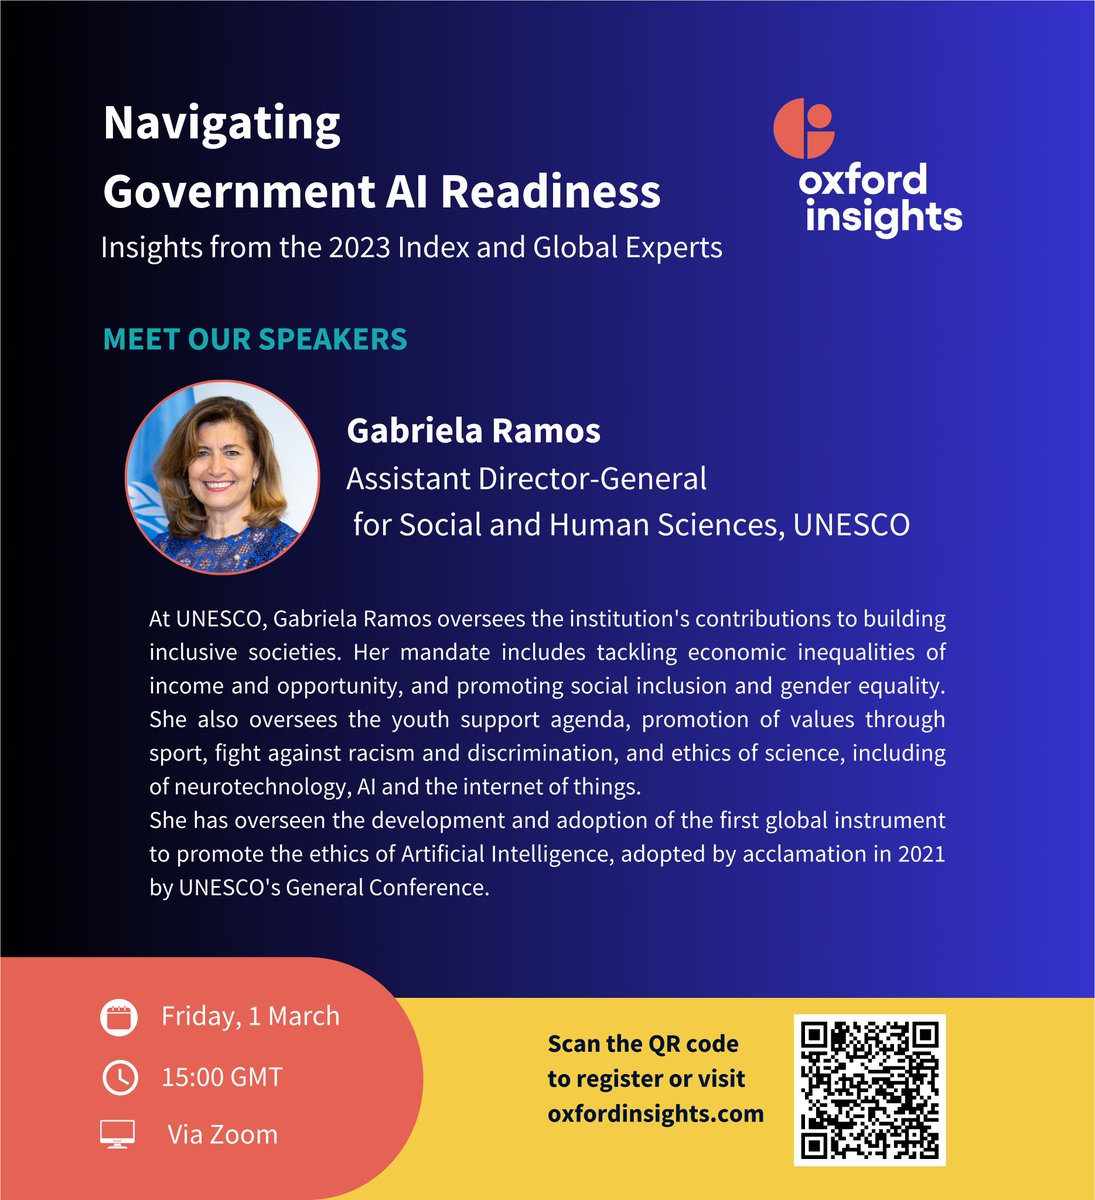 🌟 Join us in 2 weeks for our Webinar: 'Navigating AI Readiness: Insights from the 2023 Index and Global Experts'! In the coming days, we'll reveal our speakers. Meet our 1st panellist, @gabramosp, a global leader in AI governance 🌐. 👉 oxfordinsights.com/ai-readiness/w…